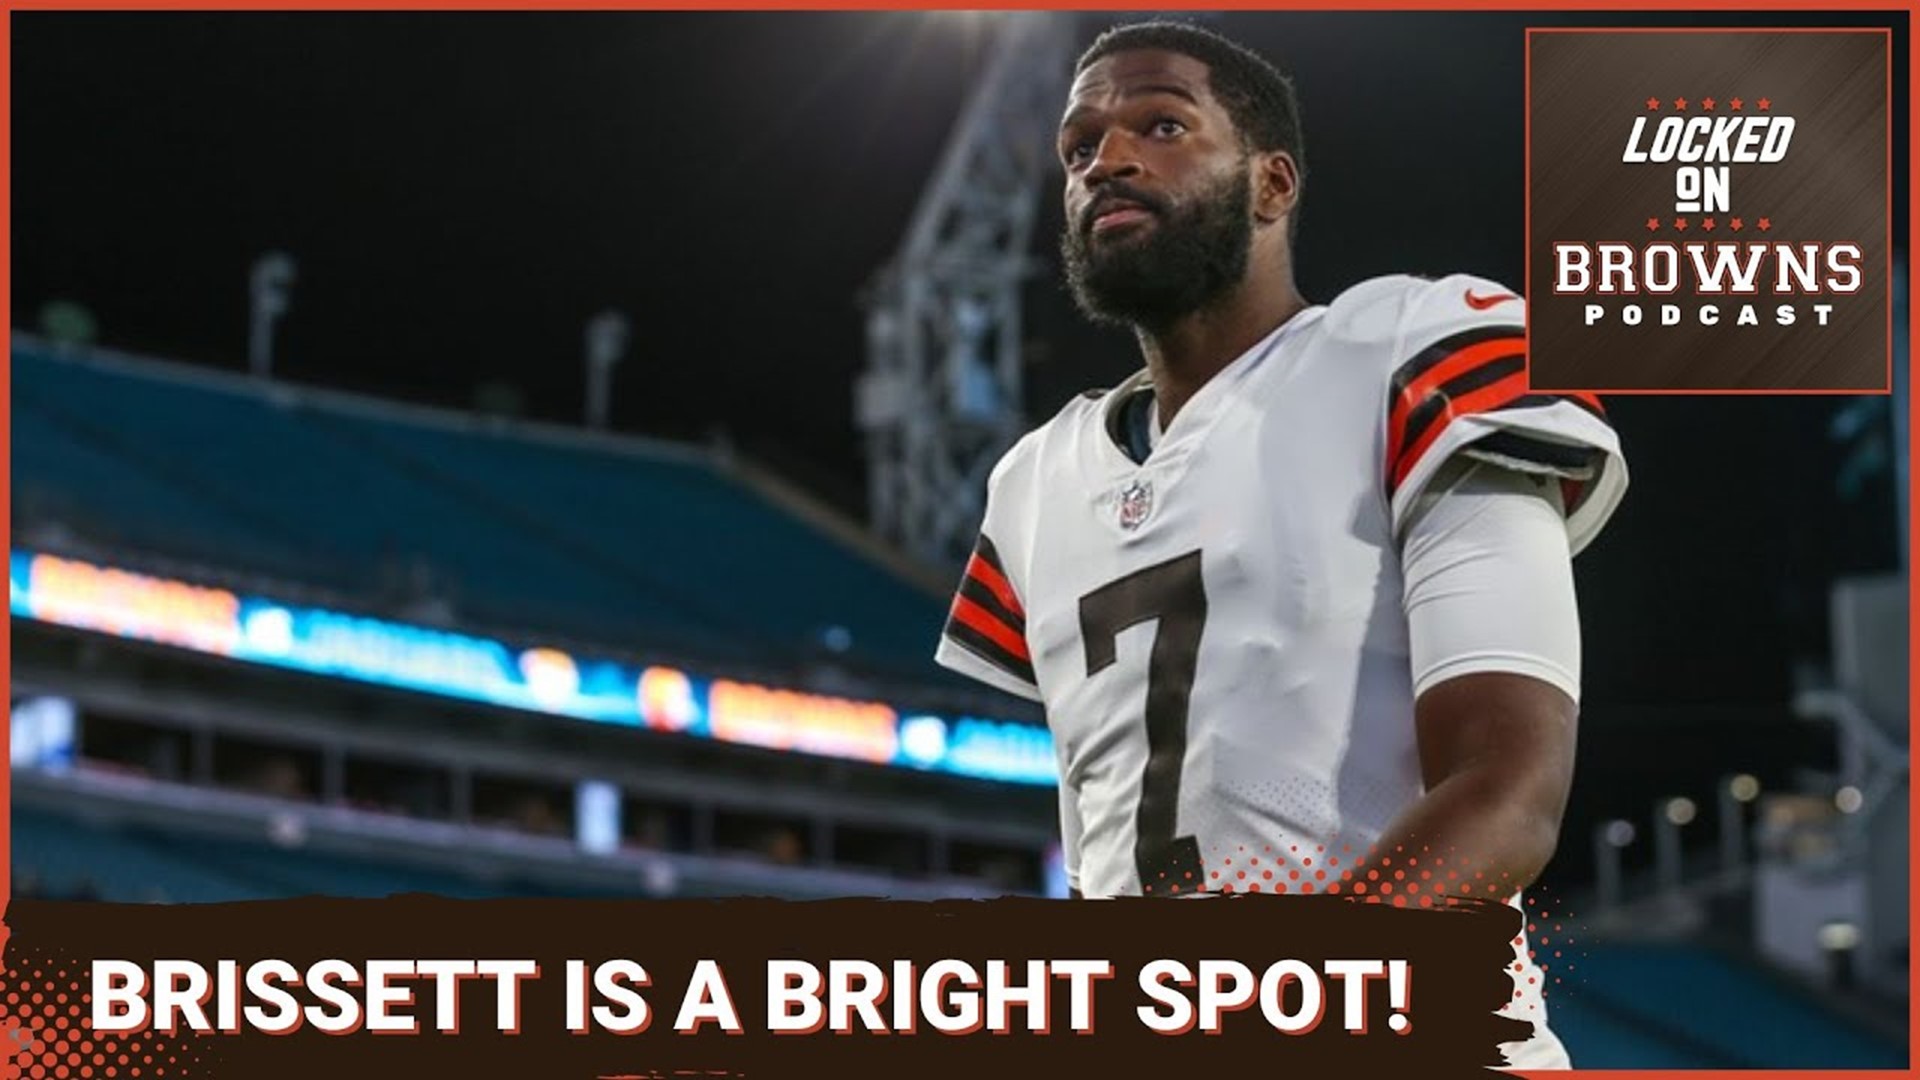 Brissett has overperformed expectations and negated any further conversations about acquiring another veteran quarterback.